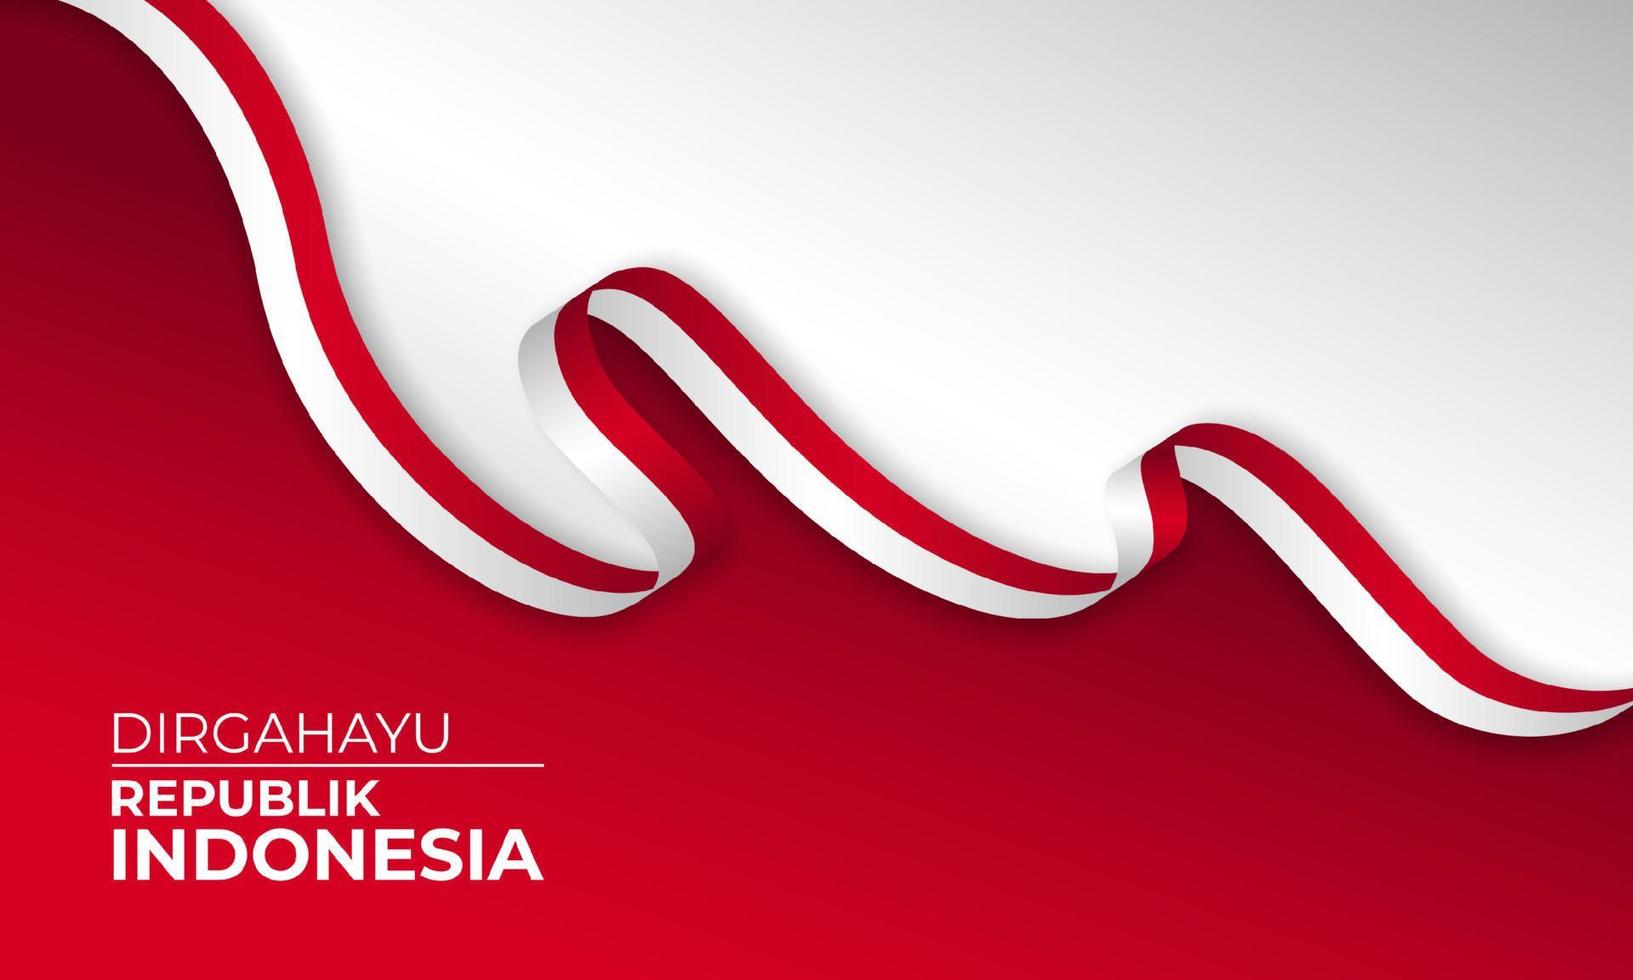 Indonesia independence day background banner design. Dirgahayu indonesia background designHappy Indonesia independence day background banner design. vector